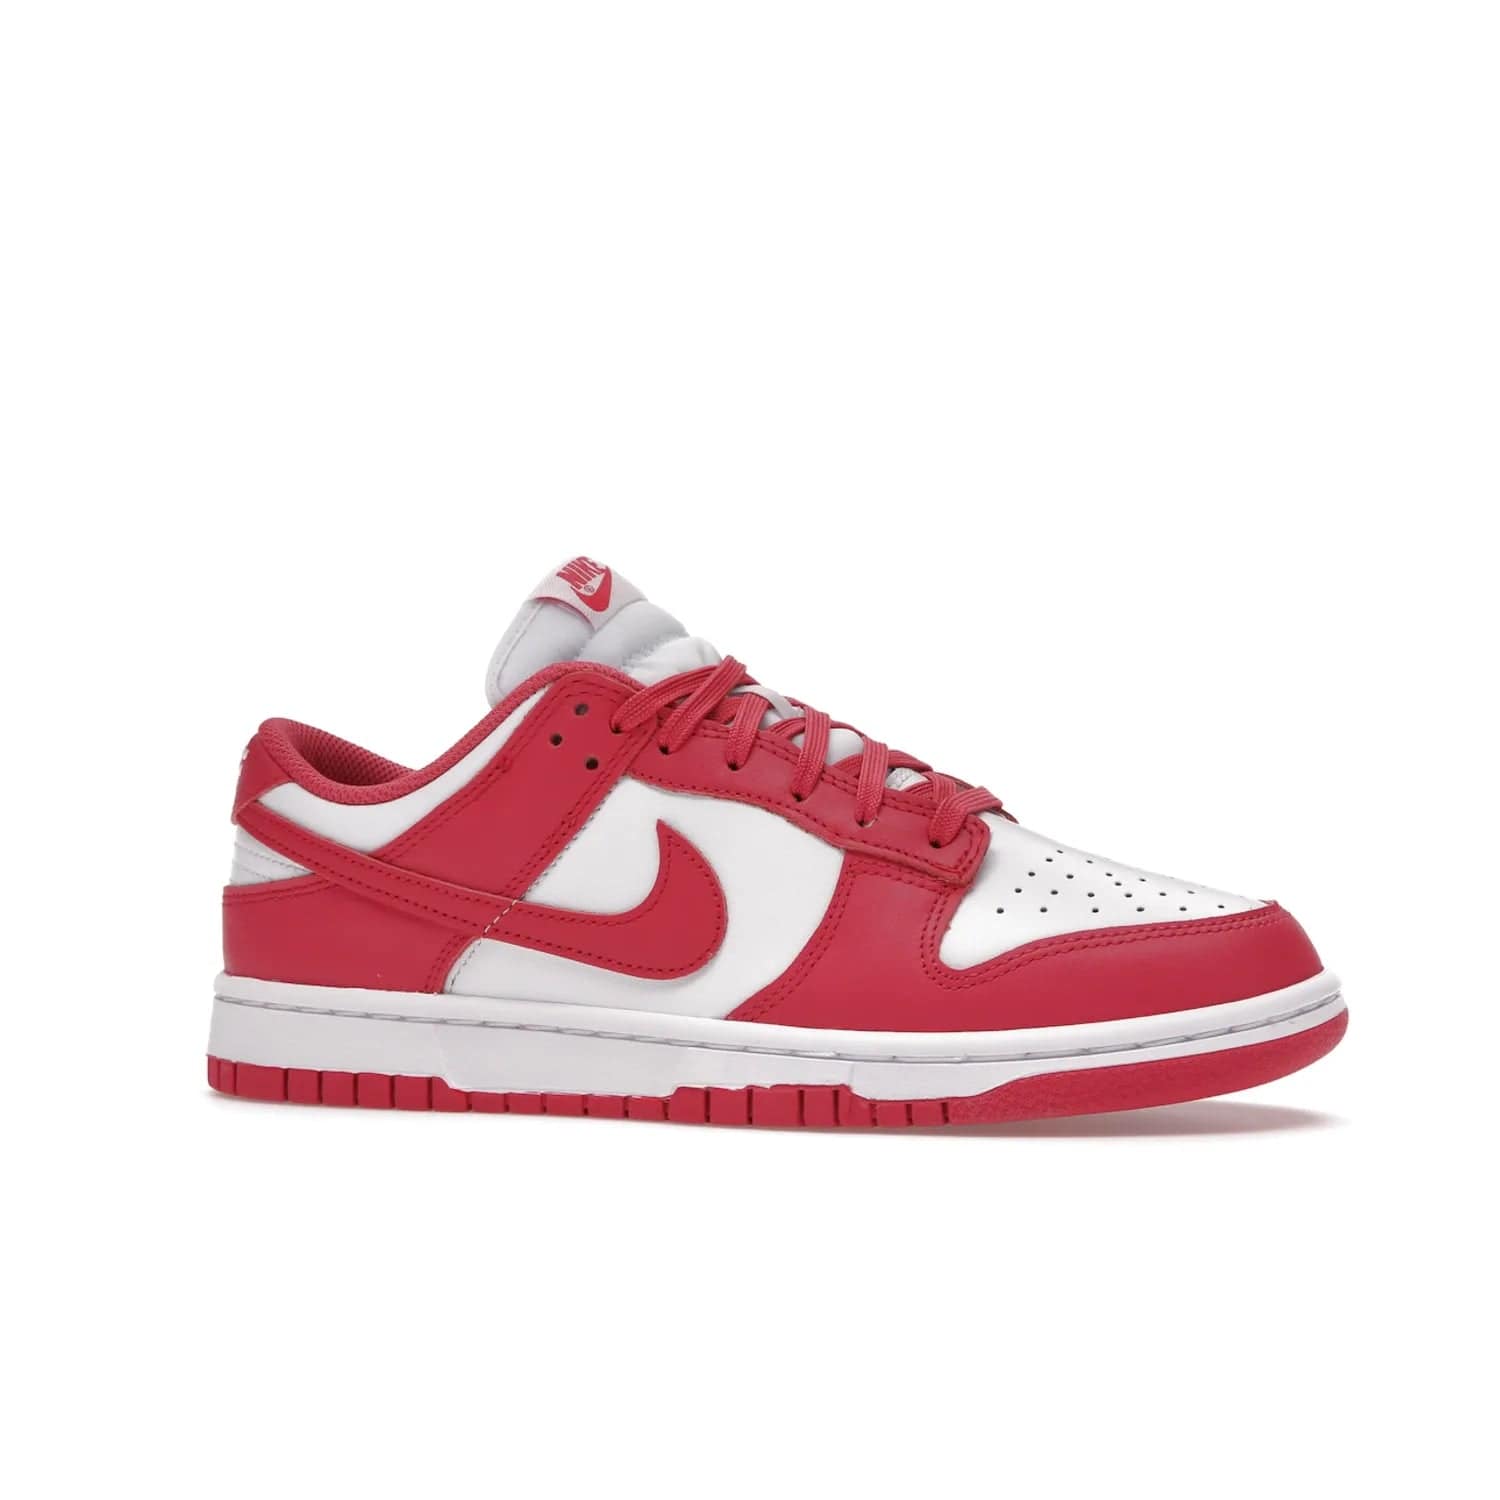 Nike Dunk Low Archeo Pink (Women's) - Image 3 - Only at www.BallersClubKickz.com - Introducing the stylish and comfortable Nike Dunk Low Archeo Pink (Women's). White/Archeo Pink colorway with white leather upper, pink overlays and Swooshes. Get yours now!